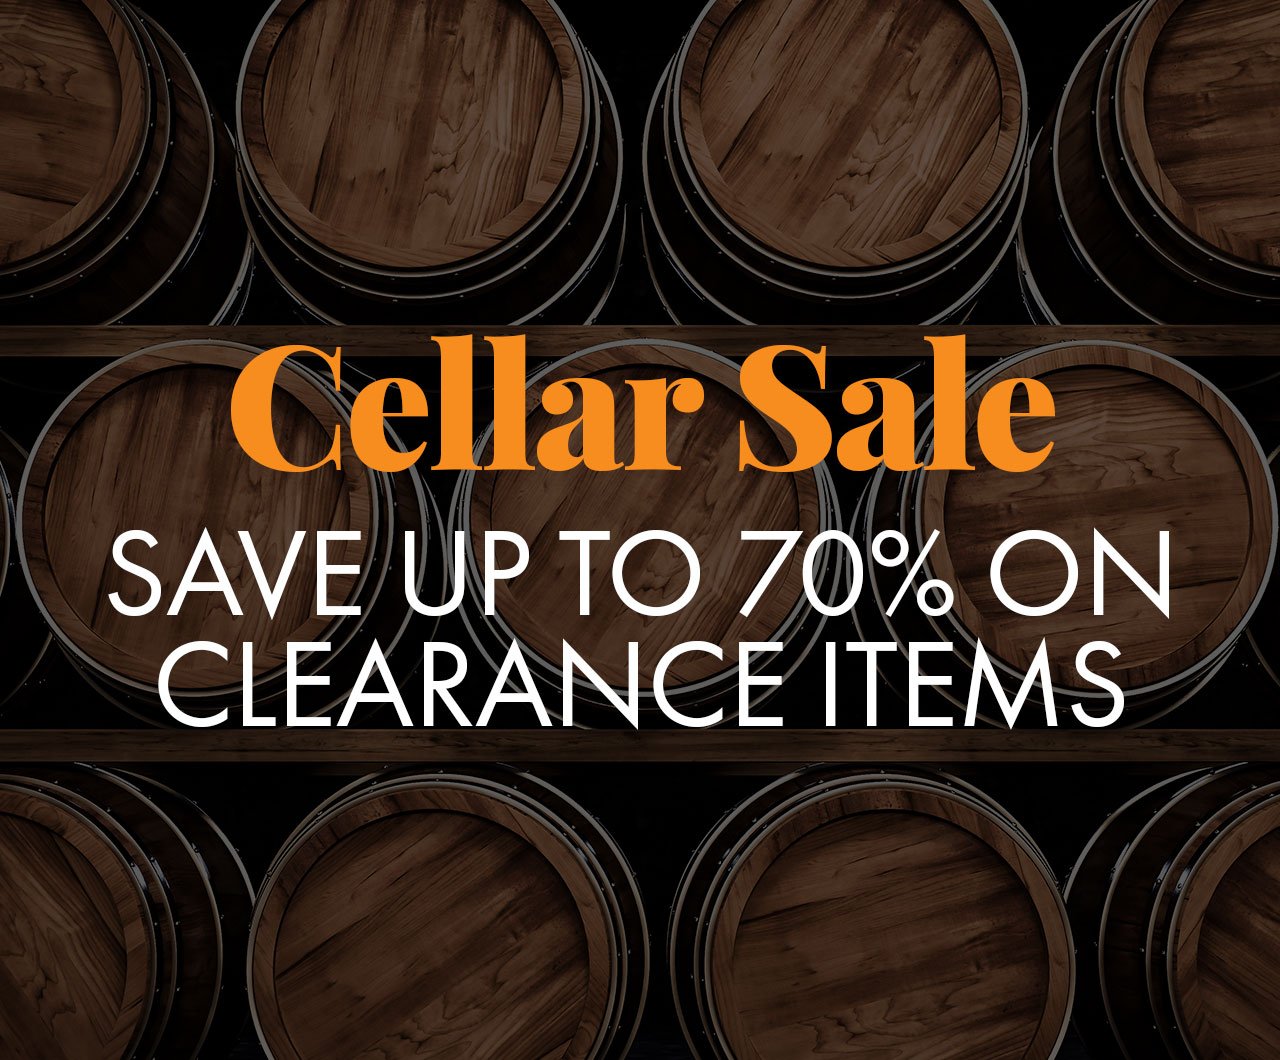 Cellar Sale. Save up to 70% on clearance items.